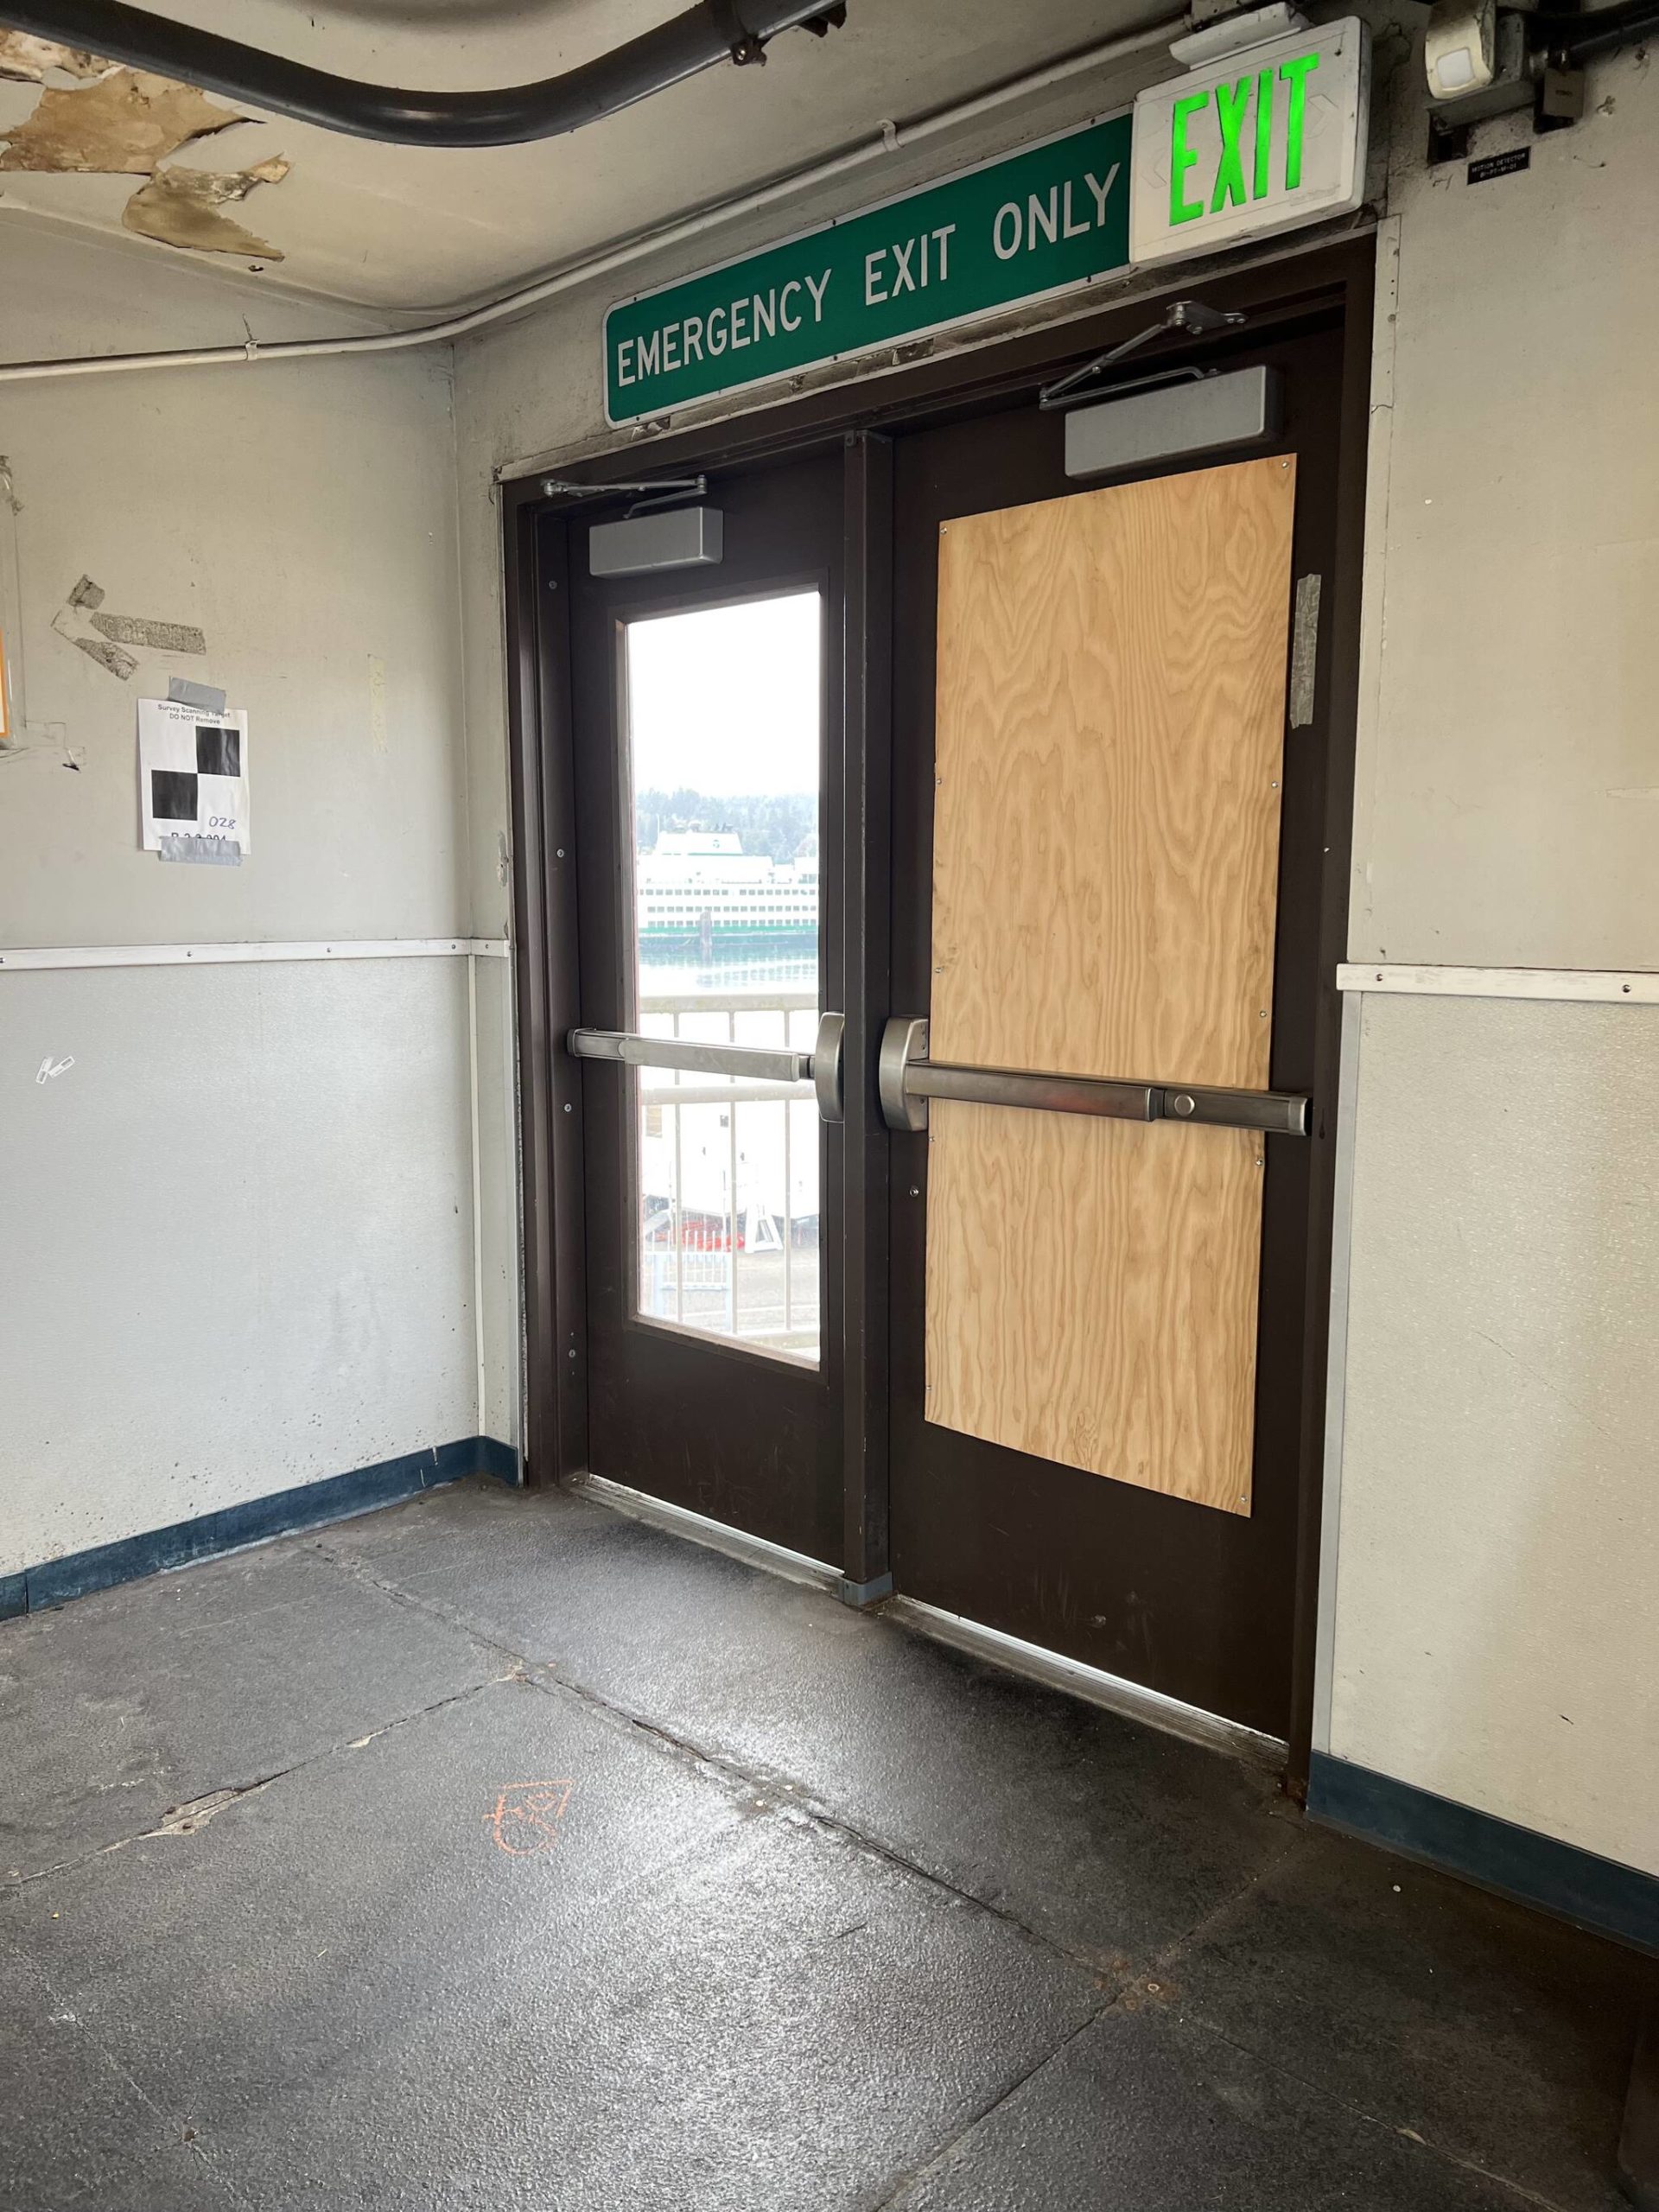 An exit door is repaired after a passenger broke it with a backpack while refusing to leave the terminal area Sept. 5.